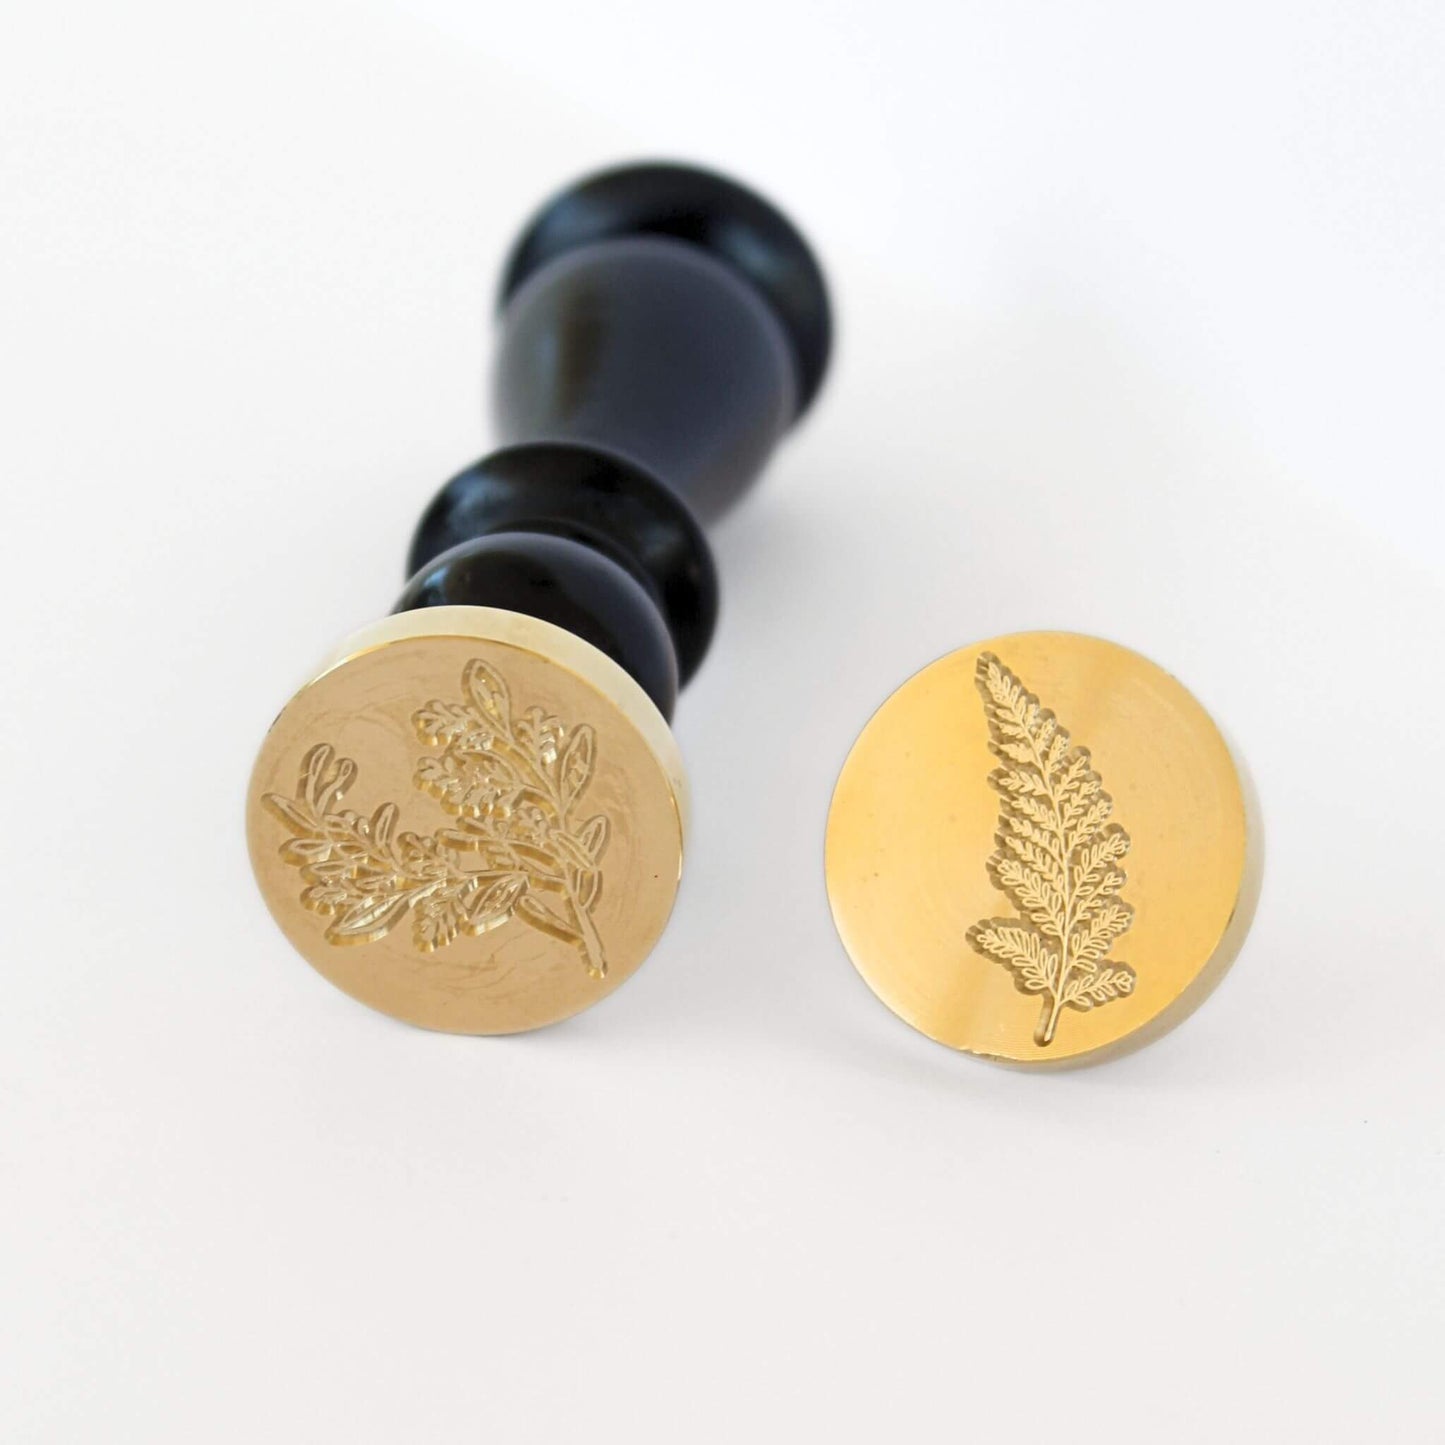 close up of fern and herboriste wax seal heads with black wooden handle